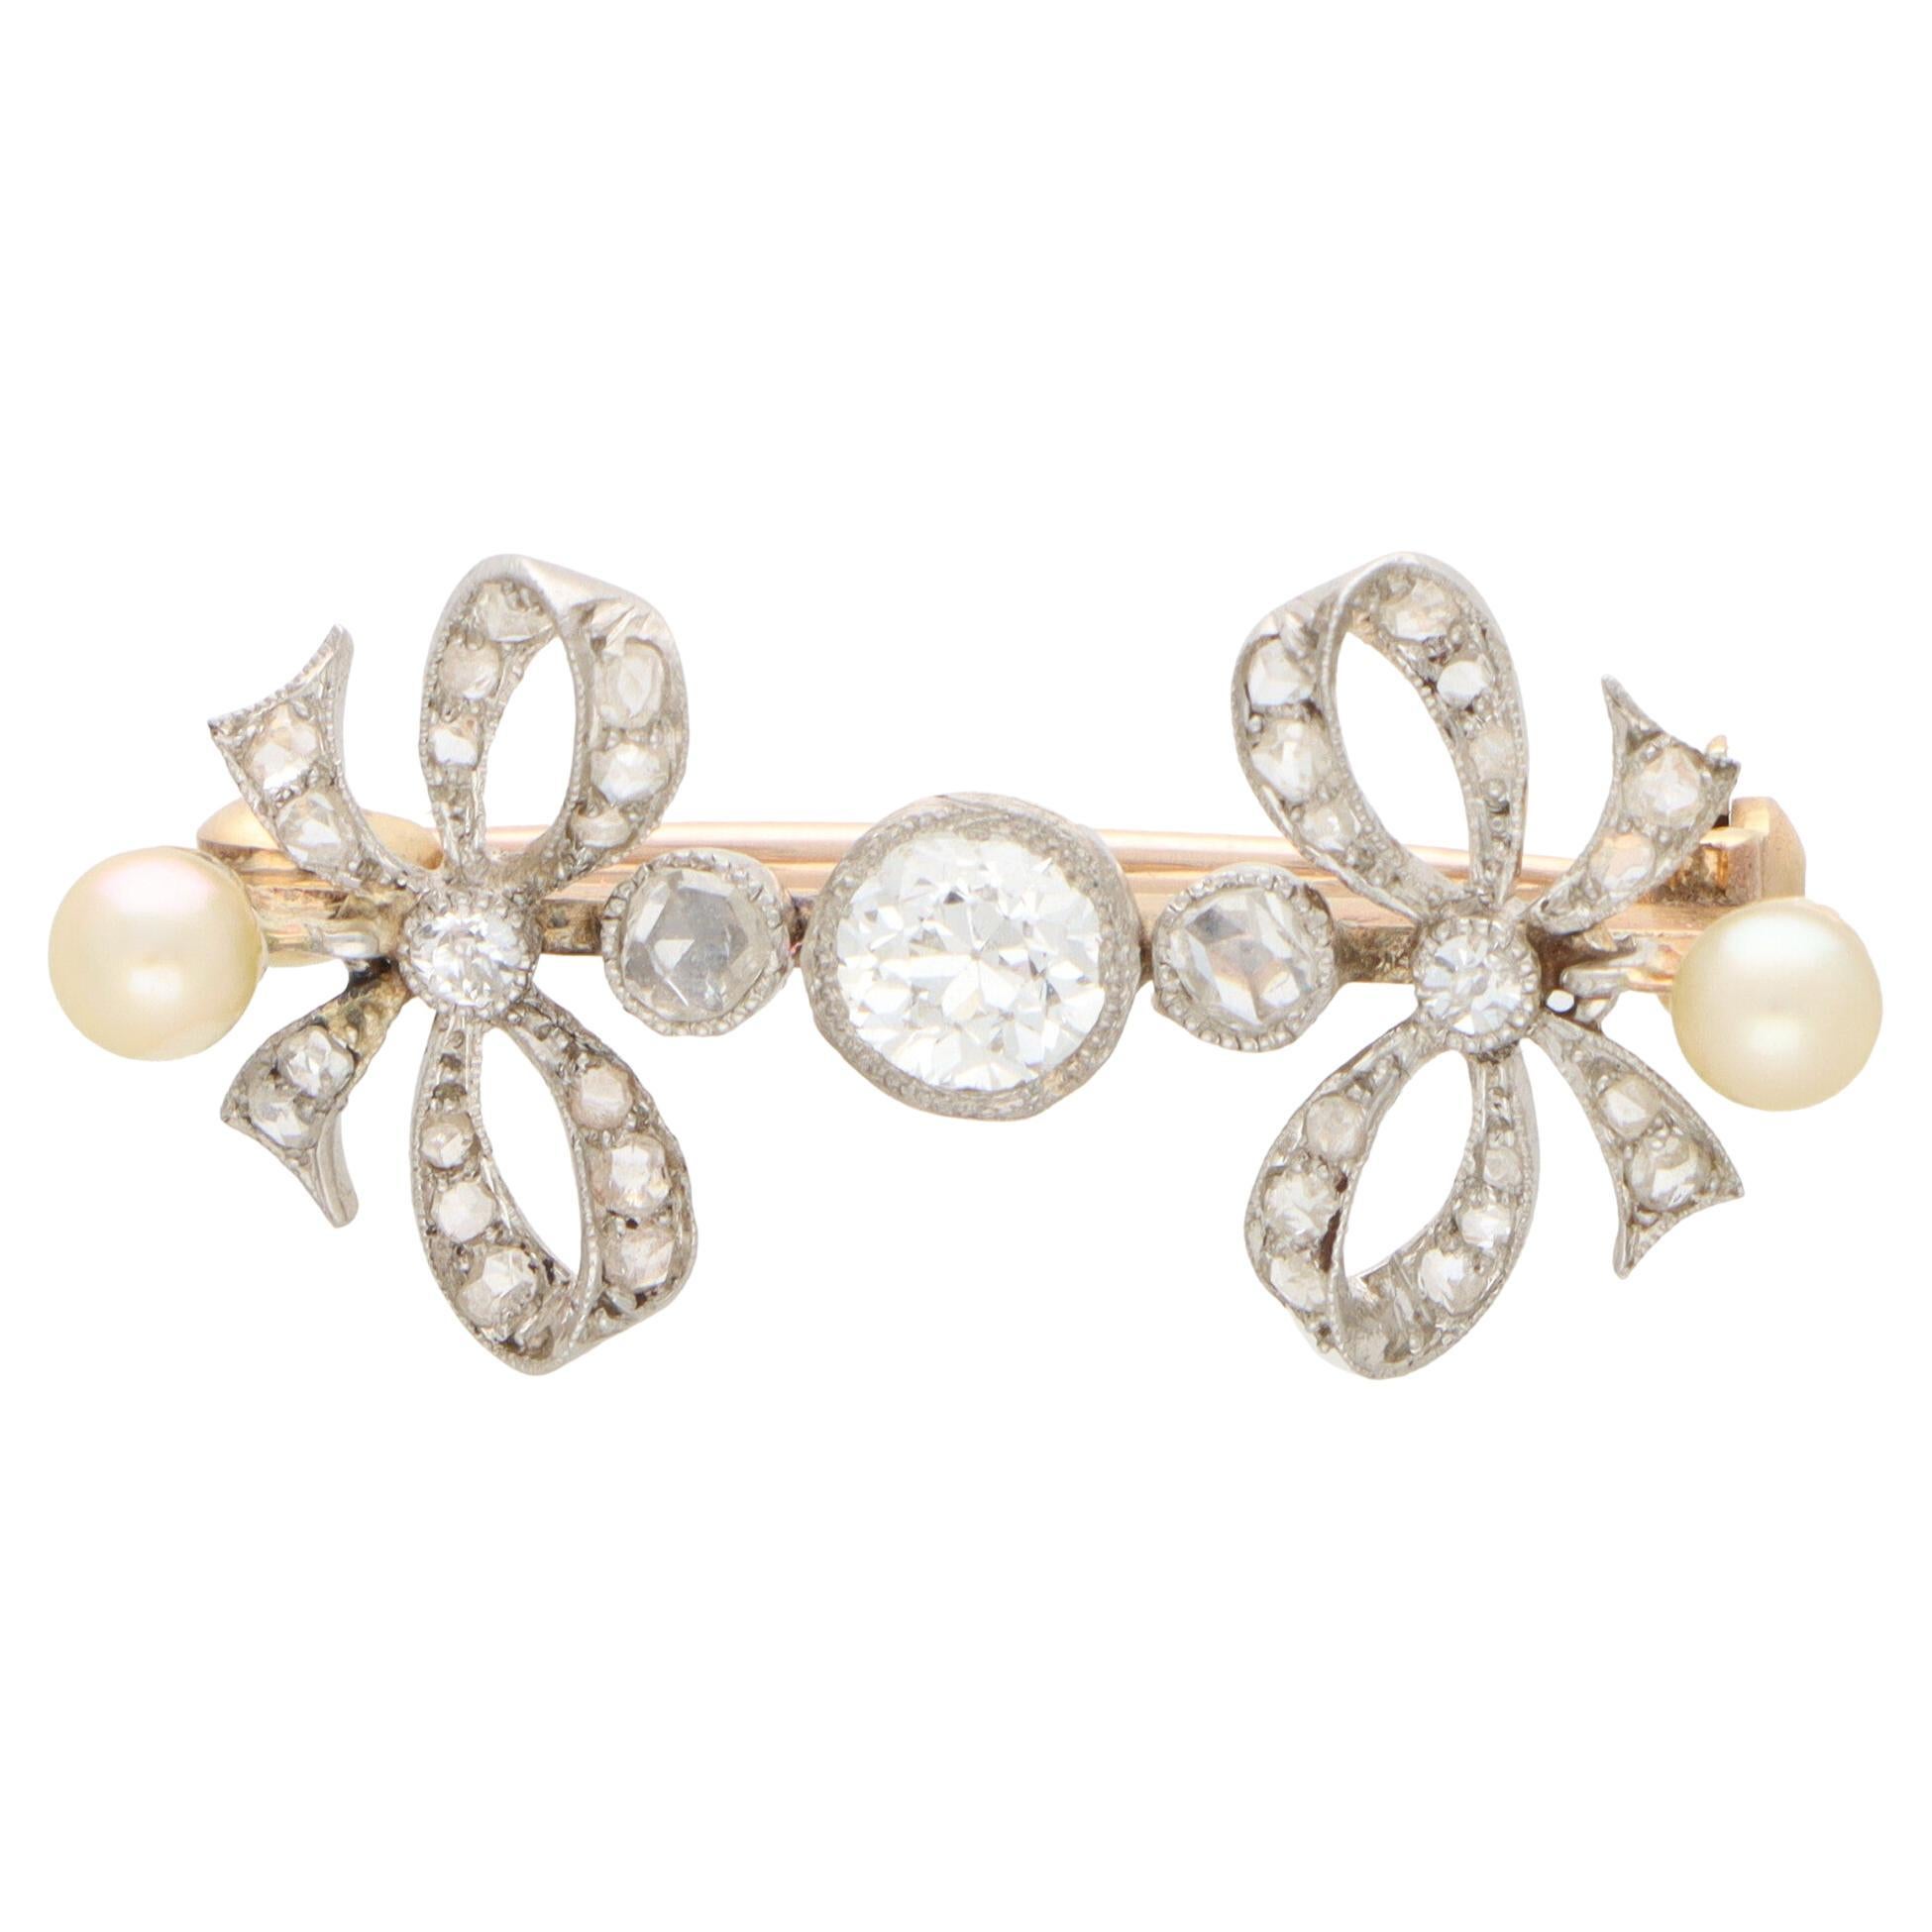 Art Deco Pearl and Old Cut Diamond Bow Pin Brooch in Platinum and Gold